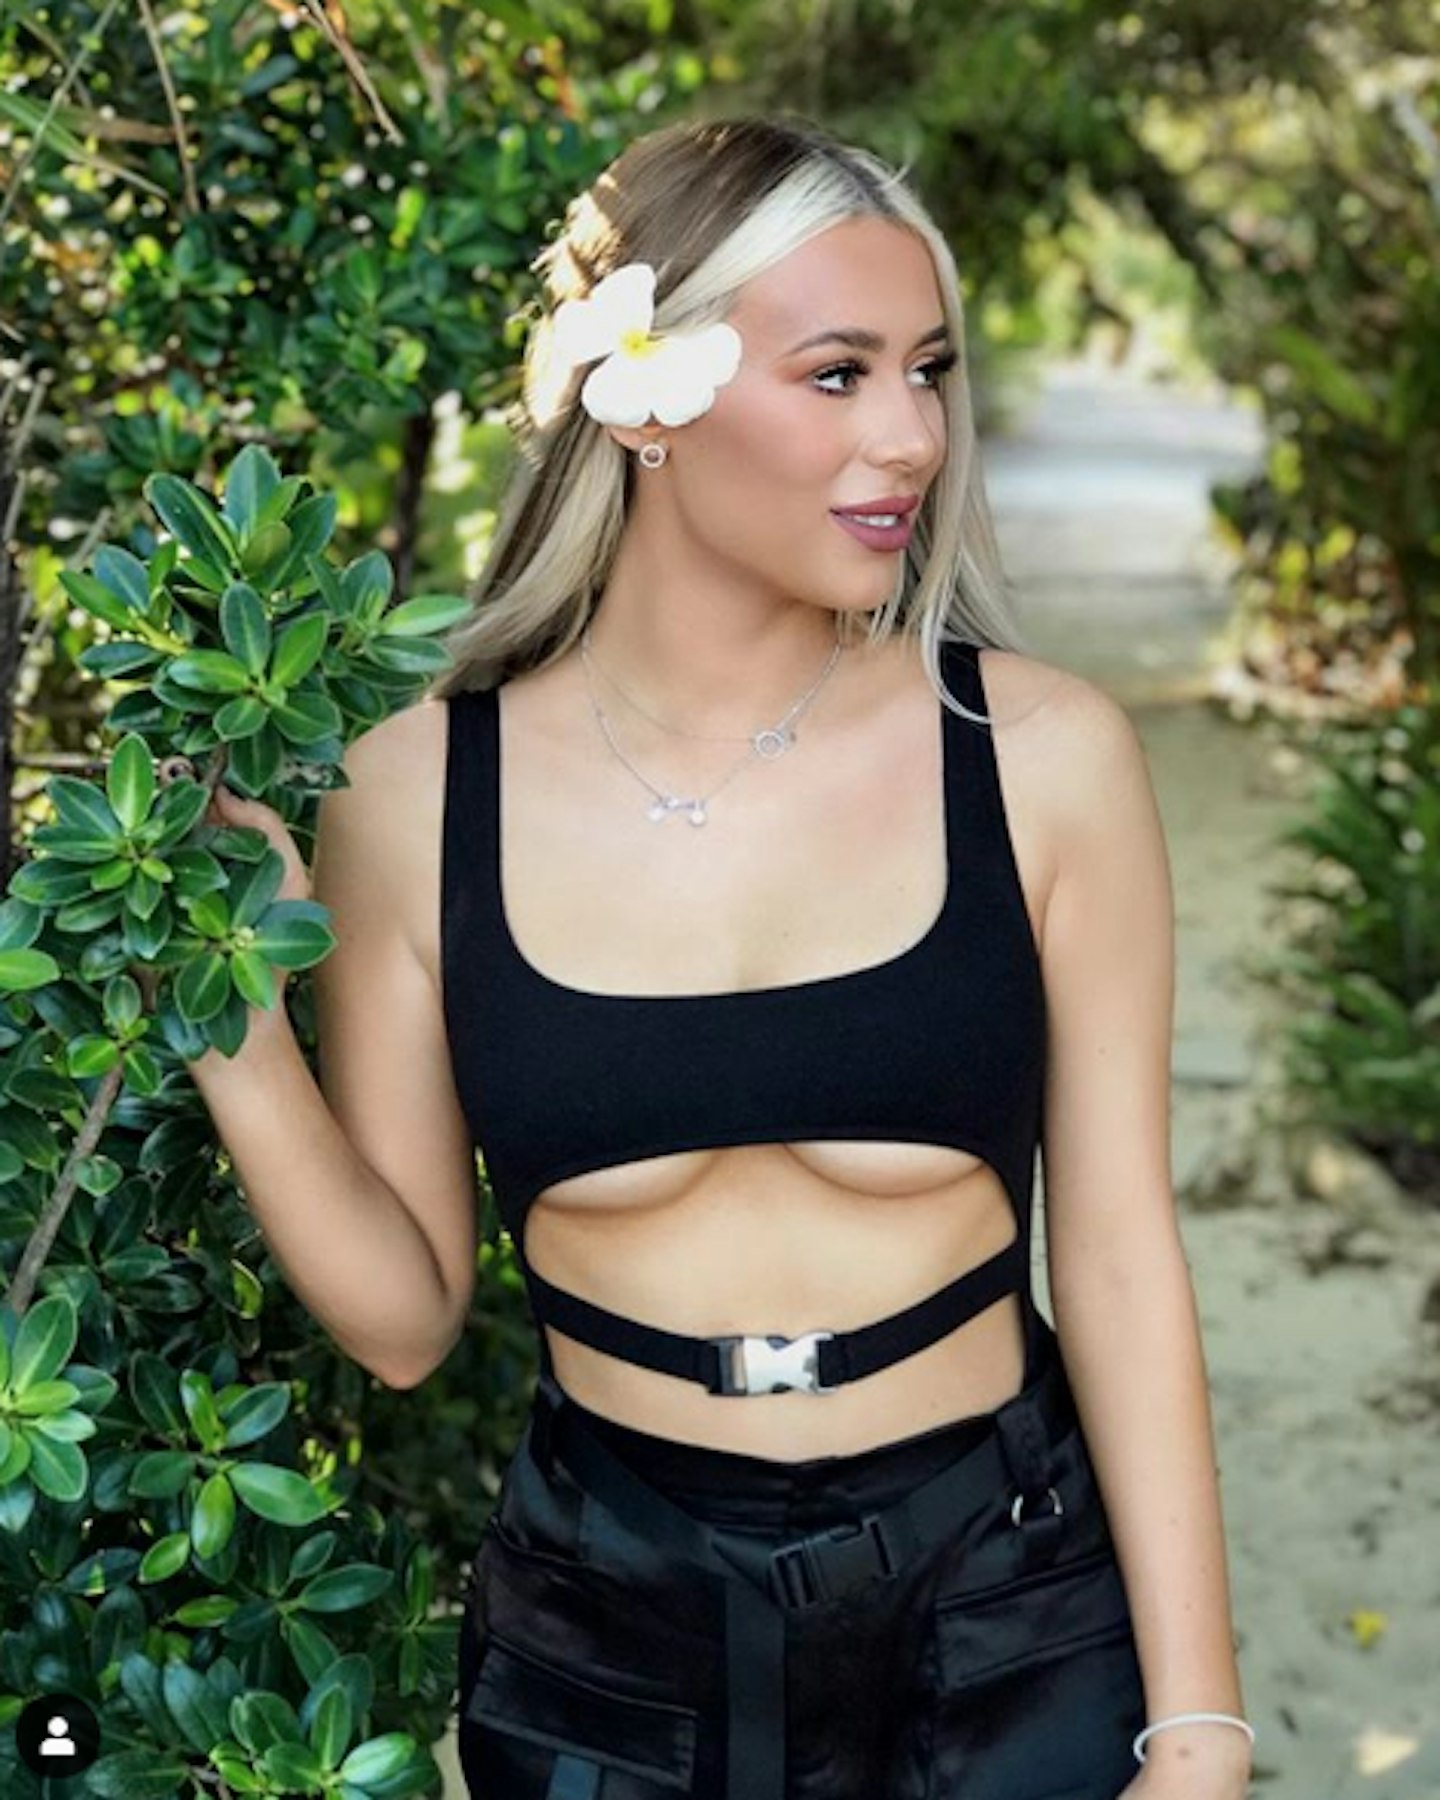 Towie's Georgia Kousoulou shows off major underboob while Chloe